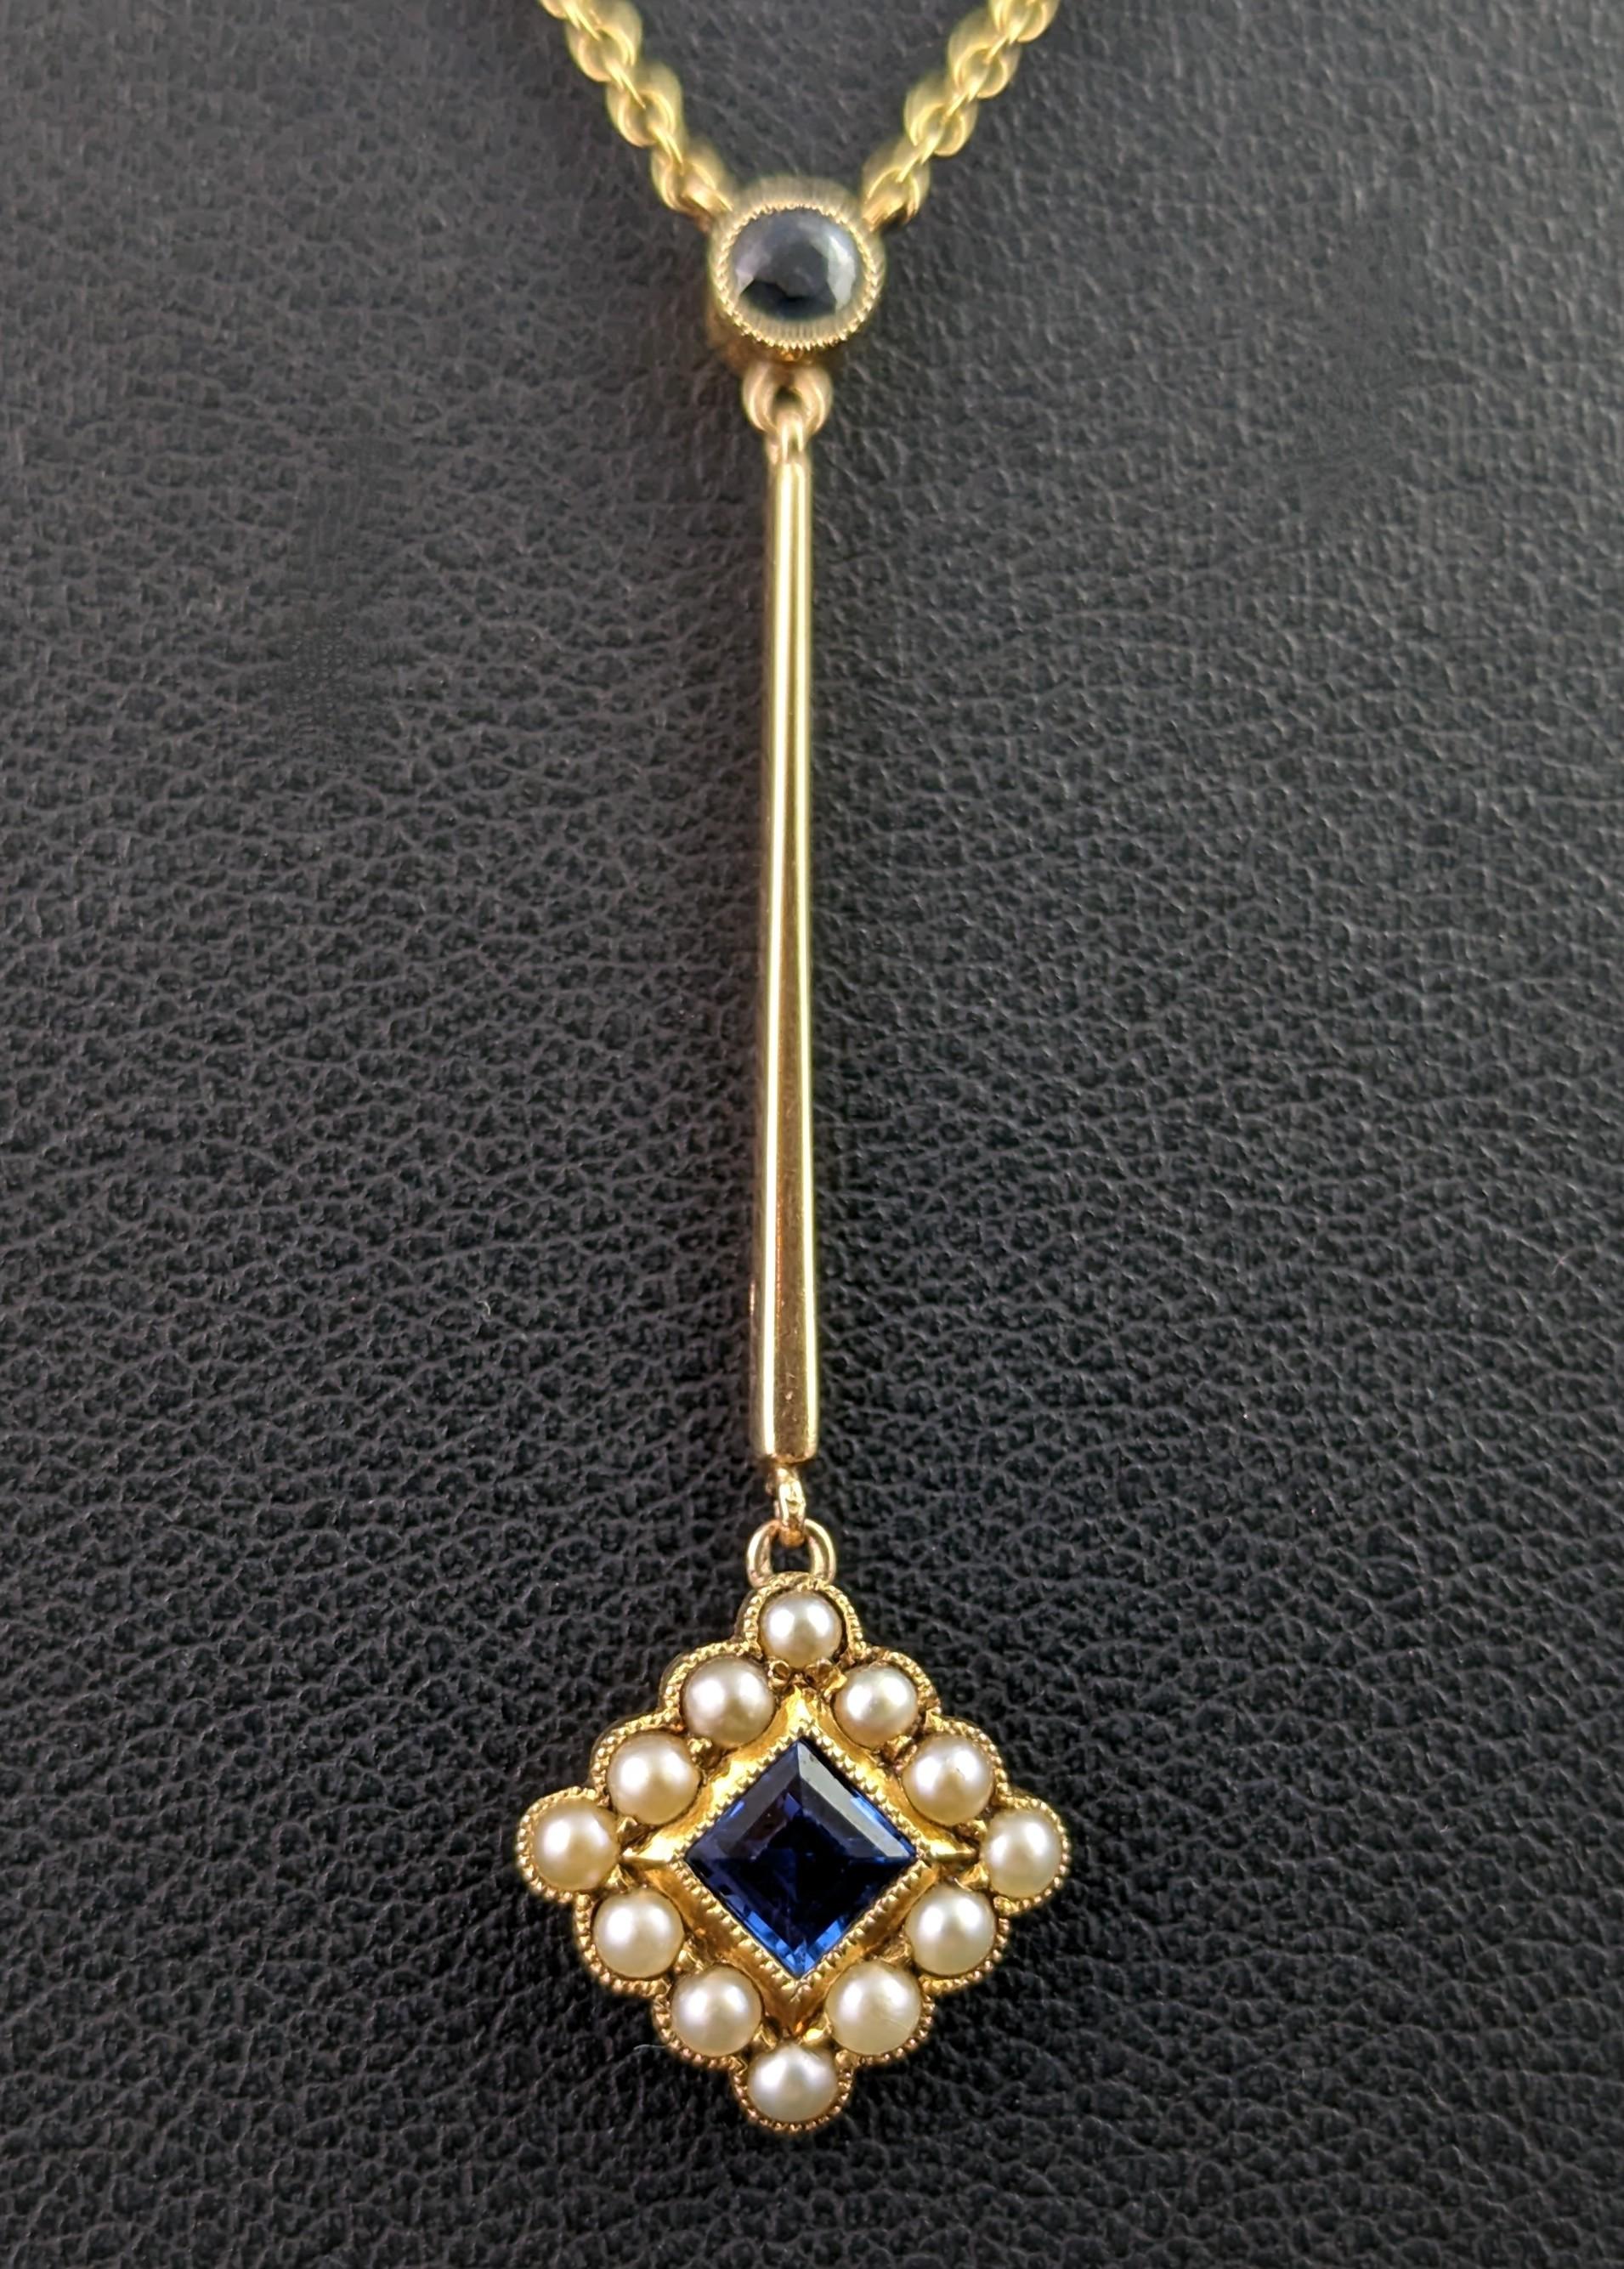 French Cut Antique Sapphire and Pearl drop pendant necklace, 15k yellow gold 